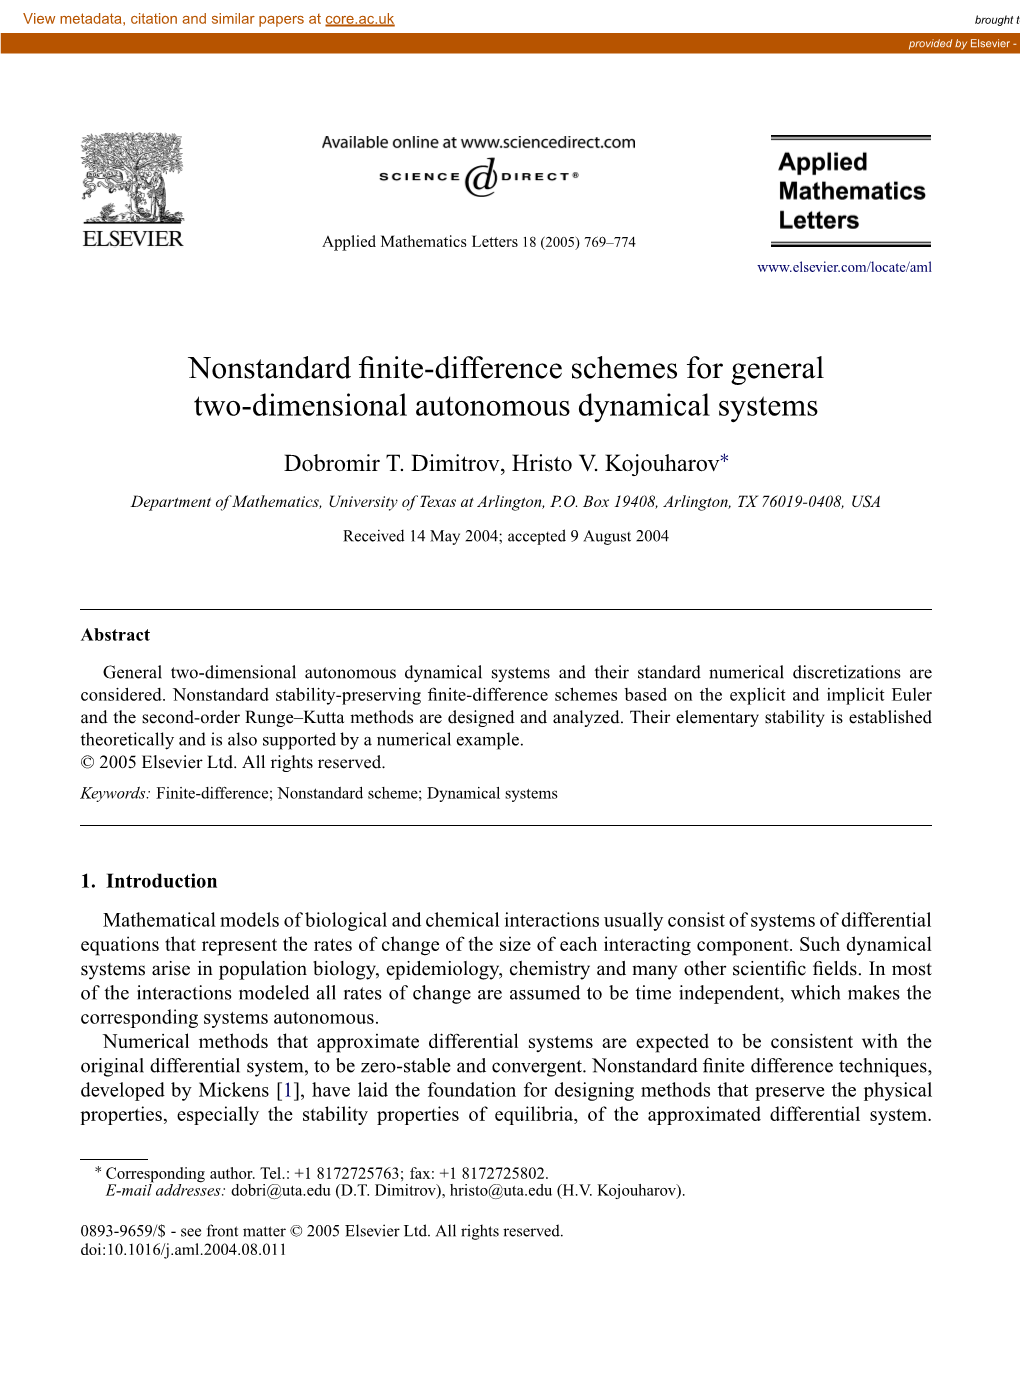 Nonstandard Finite-Difference Schemes for General Two